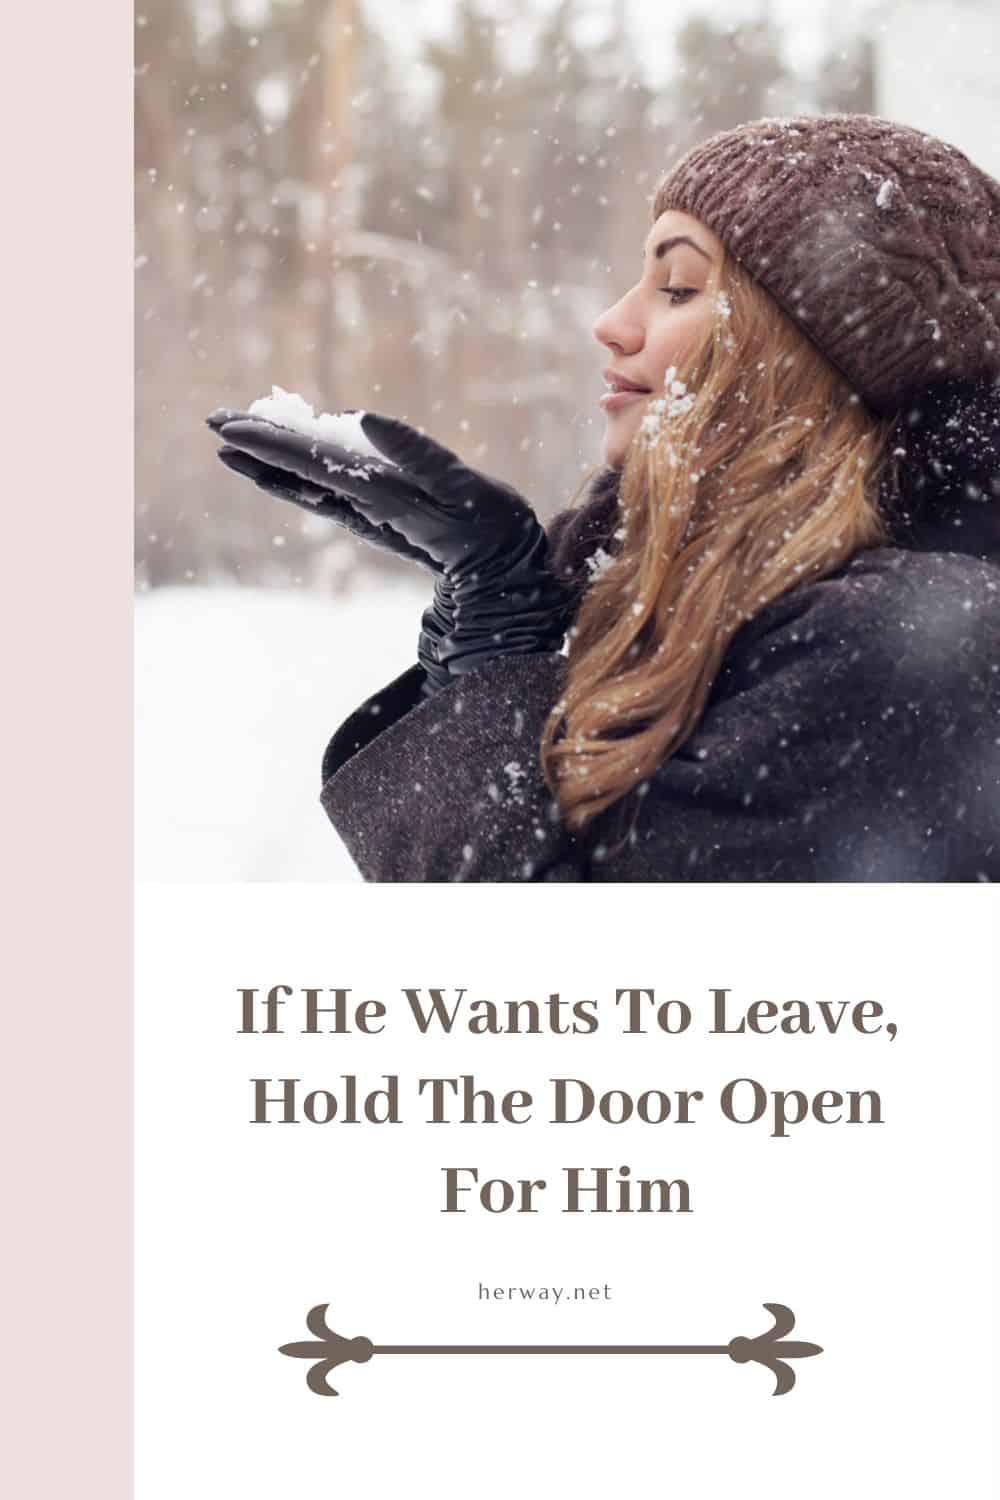 If He Wants To Leave, Hold The Door Open For Him